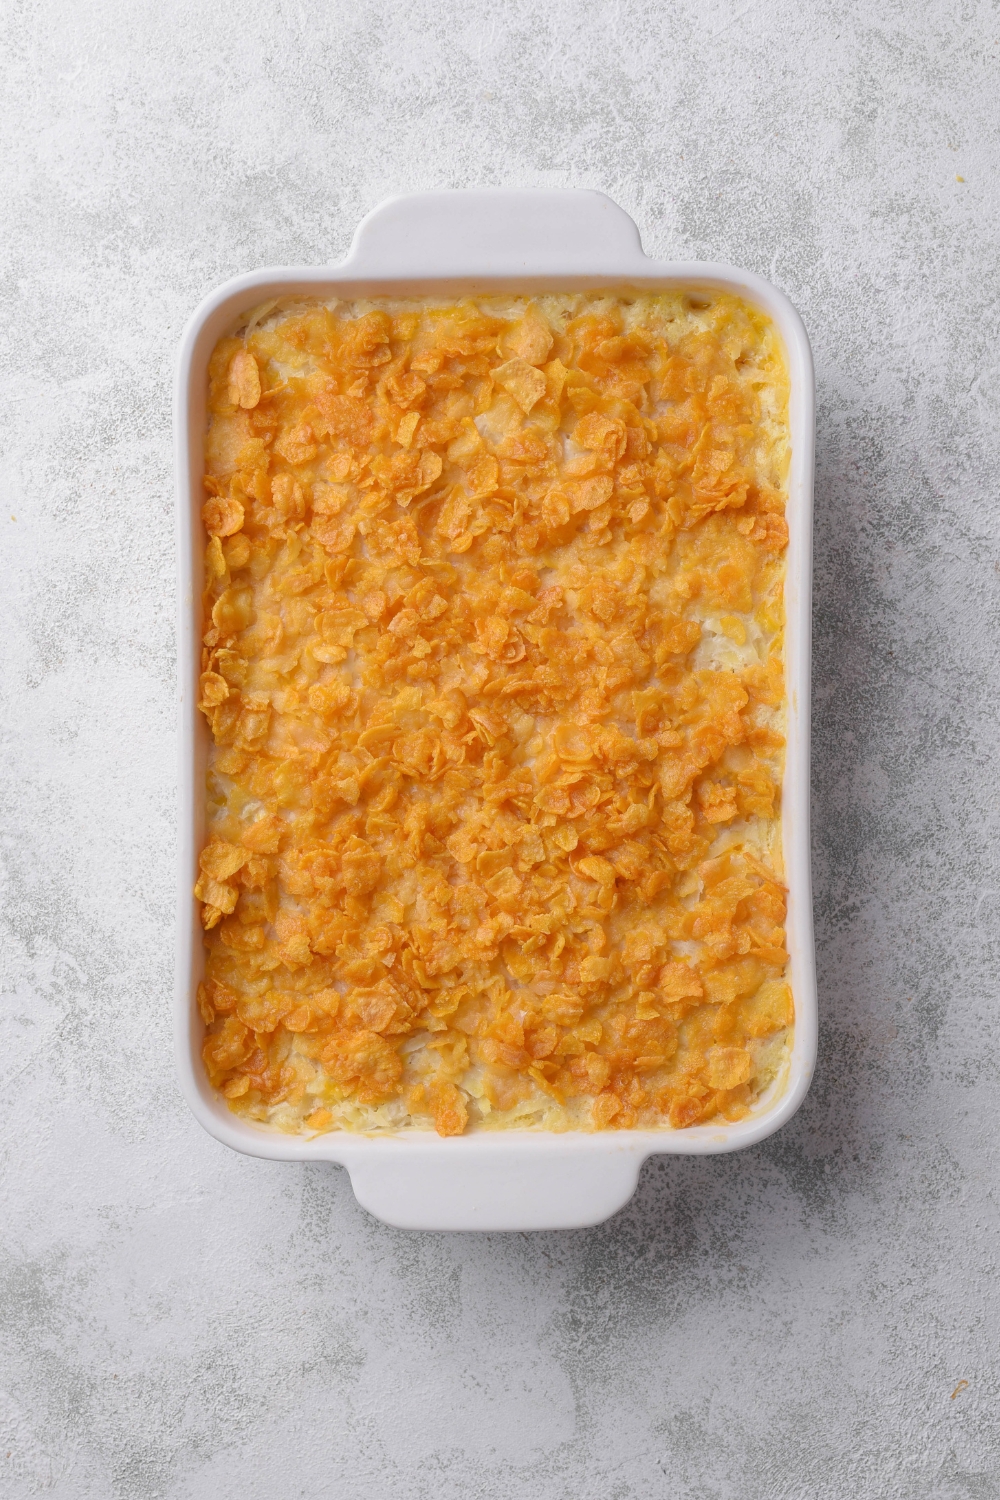 A casserole dish with baked hash brown casserole topped with corn flakes.